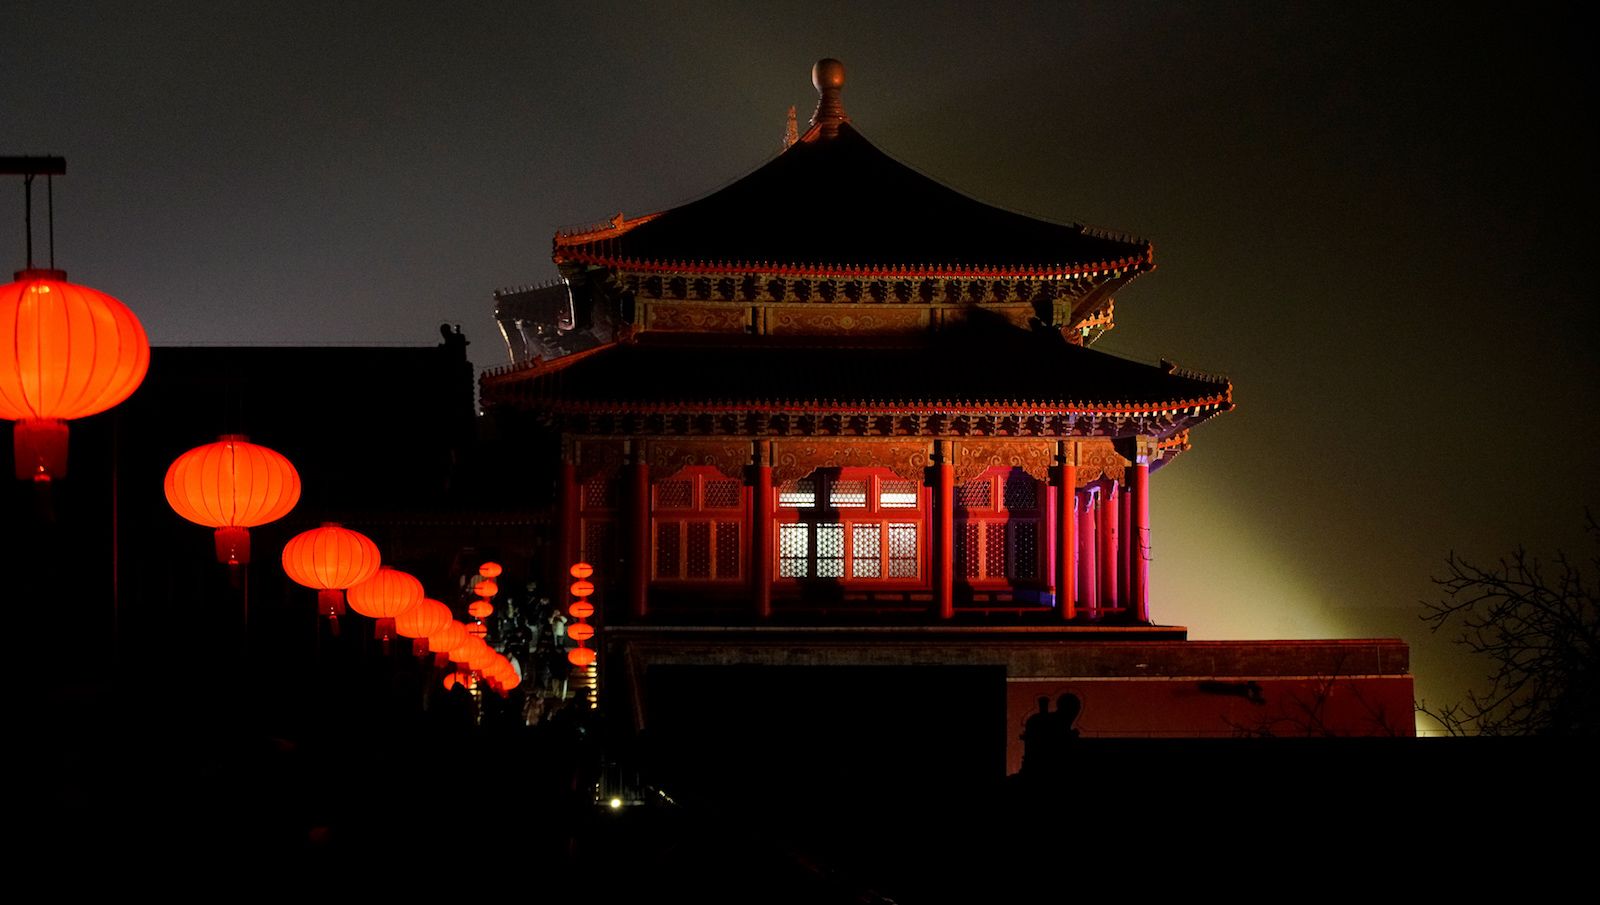 The Forbidden City Offers a Rare Nighttime Glimpse of China's Imperial Past  - The New York Times